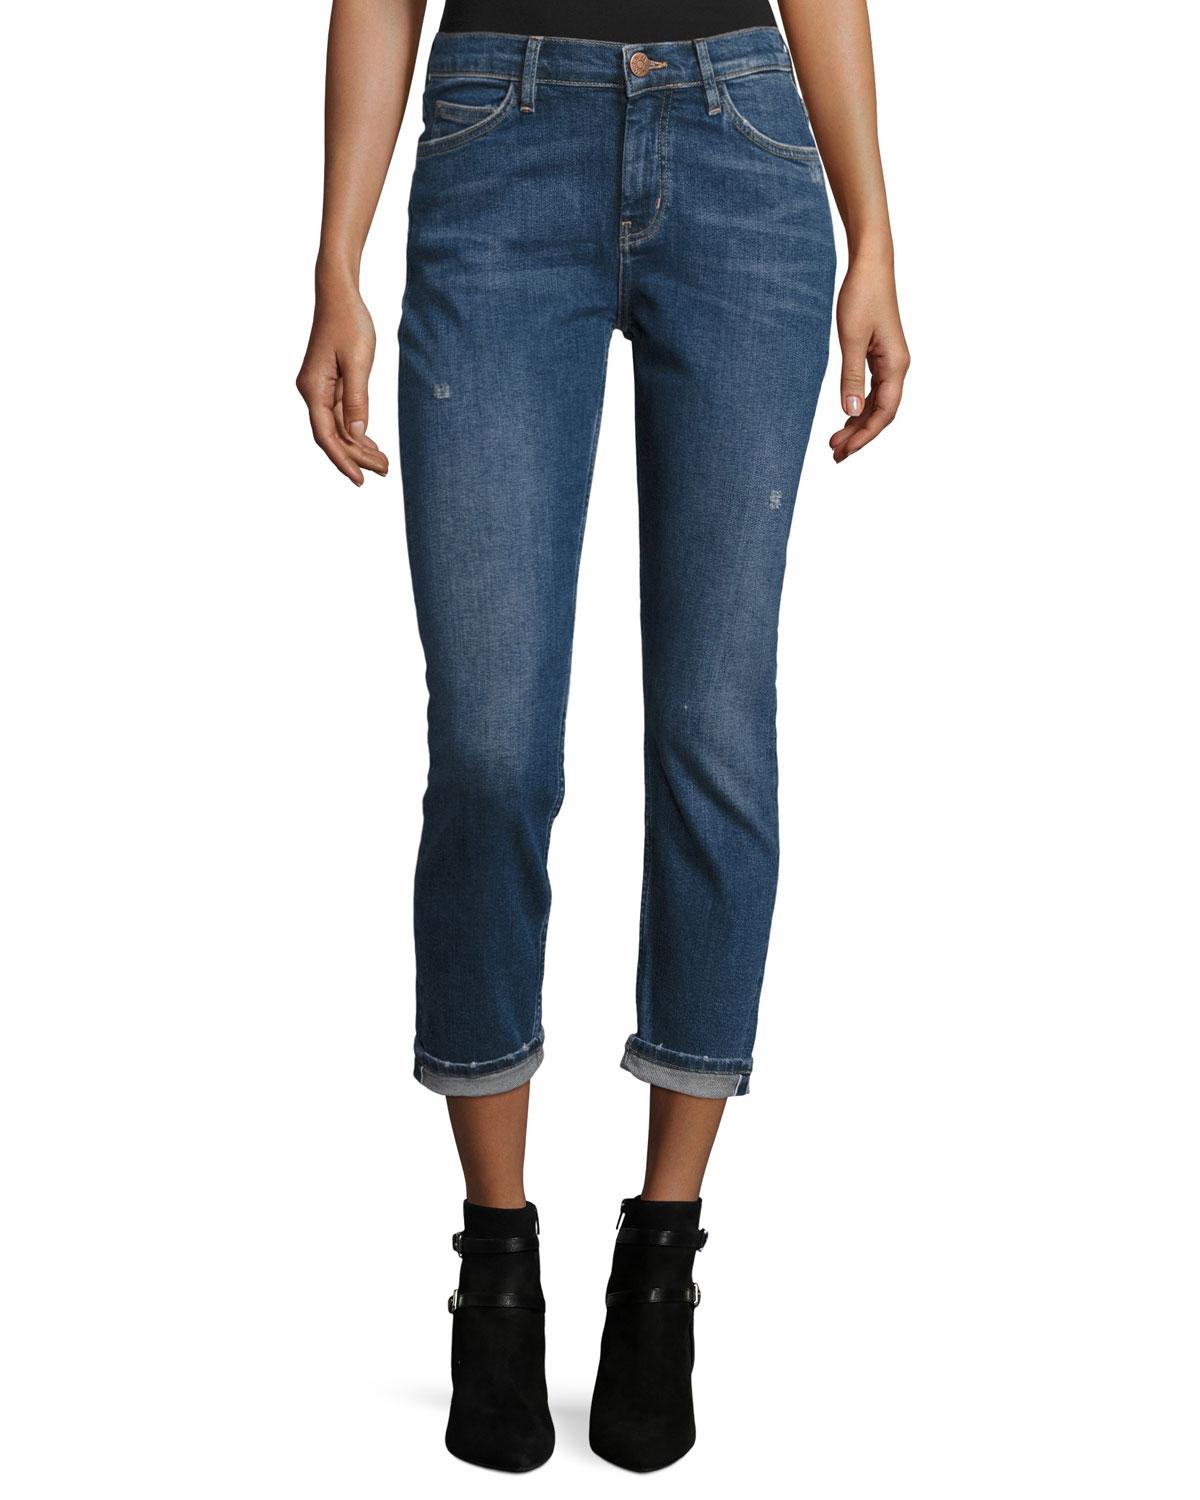 Mih jeans Tomboy Cropped Denim Jeans in Blue | Lyst